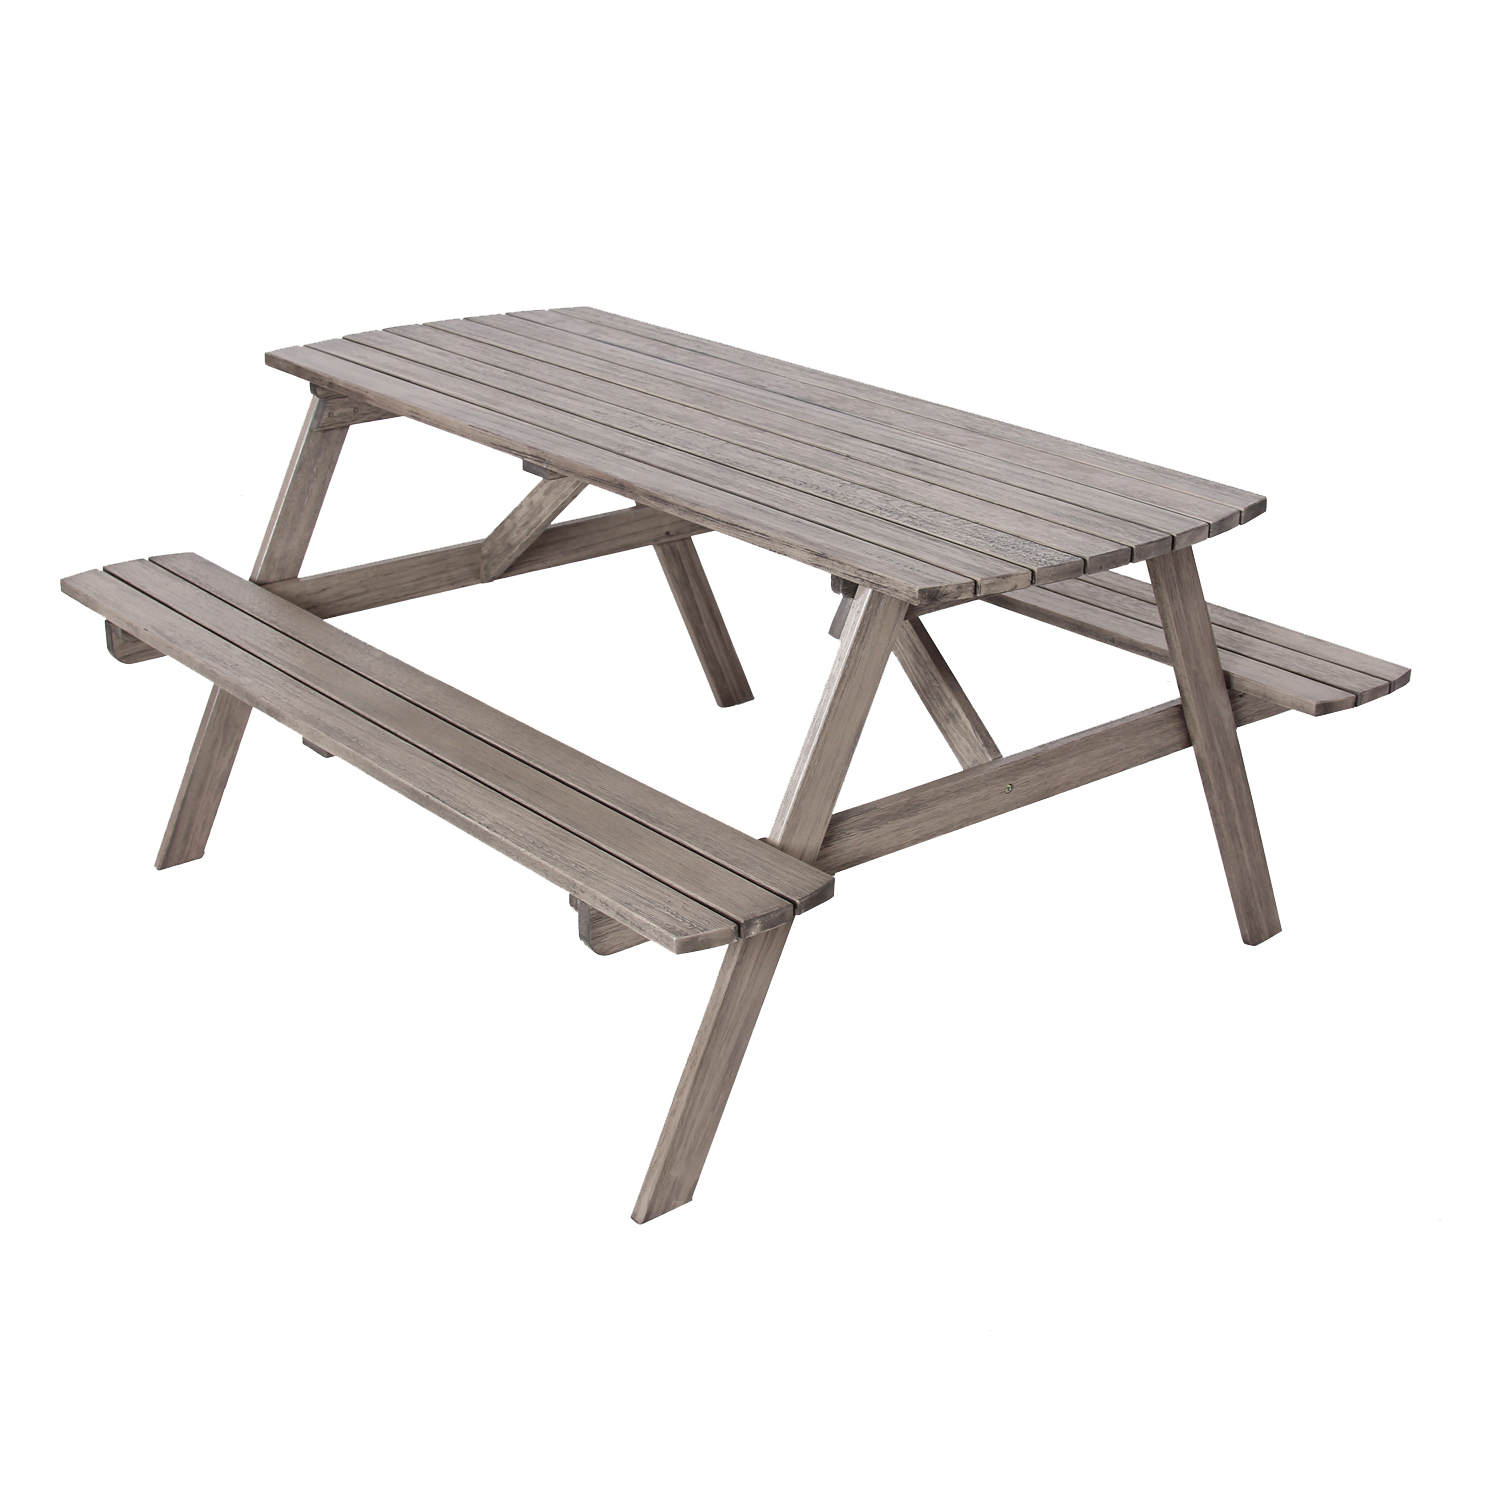 Mainstays Martis Bay Wood Outdoor Picnic Table, Gray - image 2 of 6